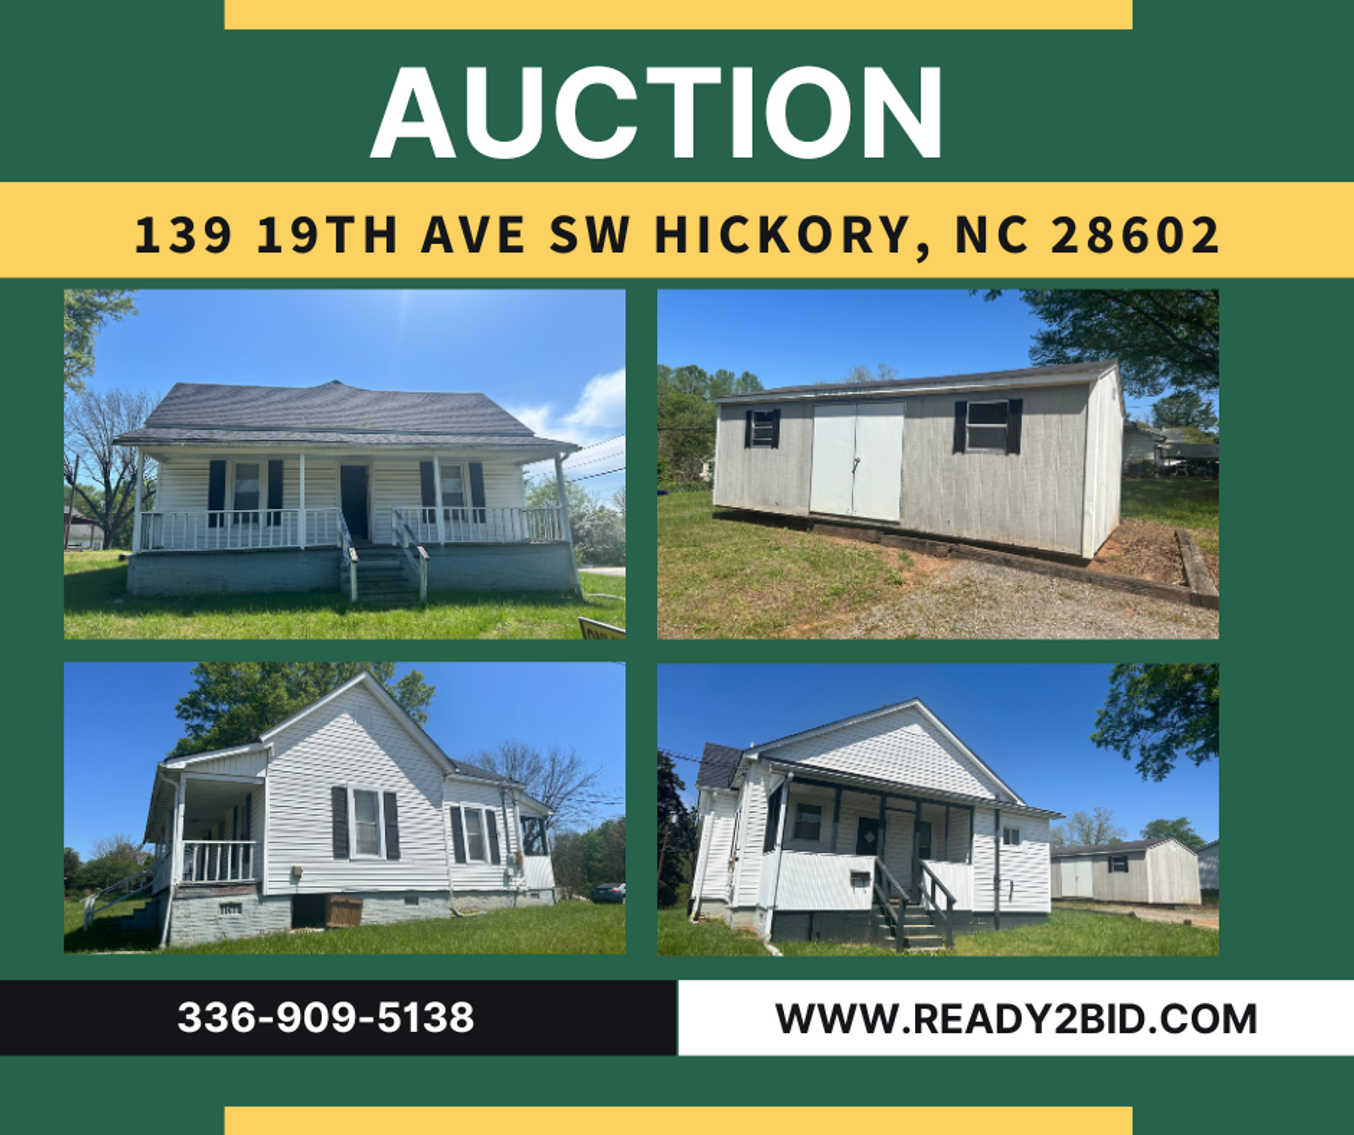 Hickory Home Auction